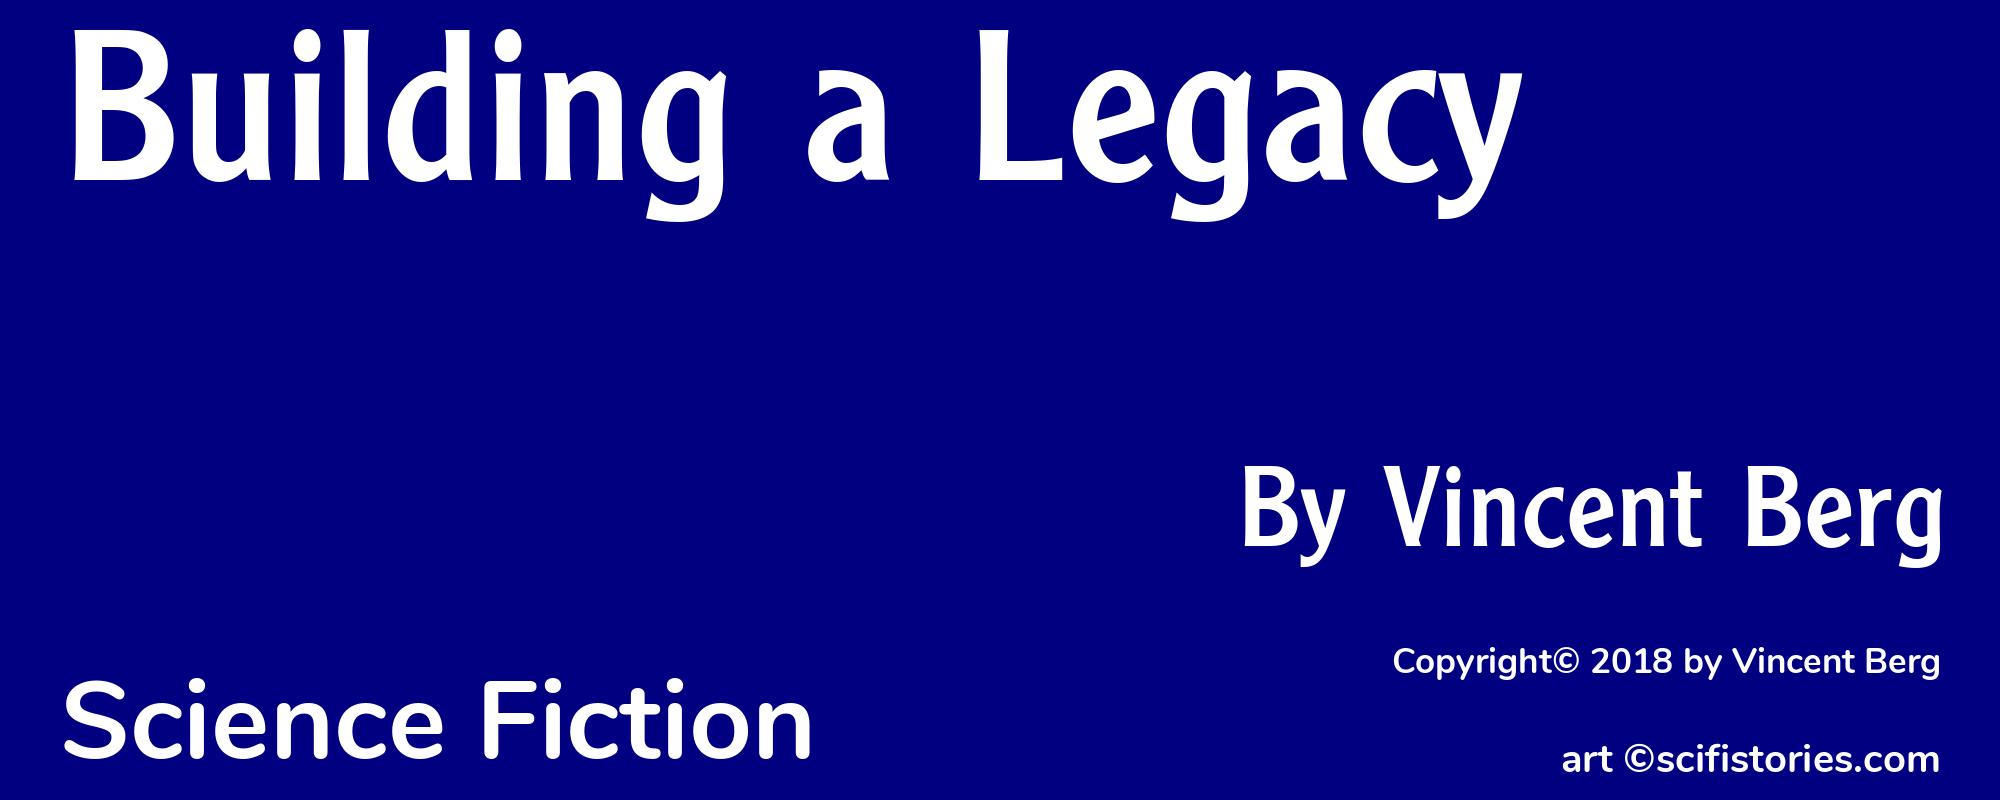 Building a Legacy - Cover